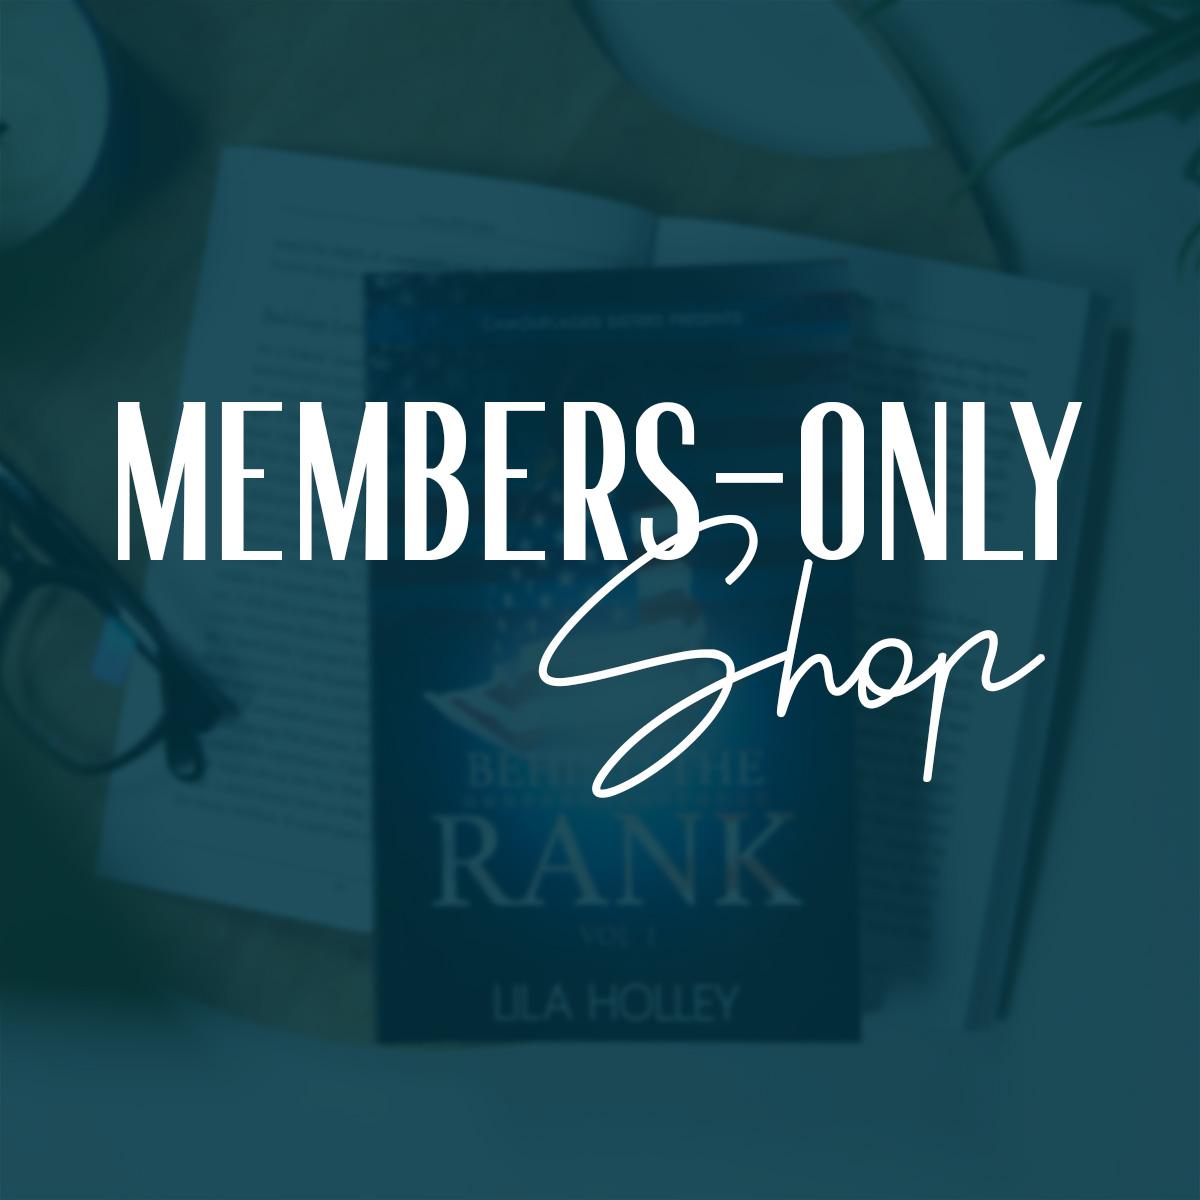 Members-Only Shop